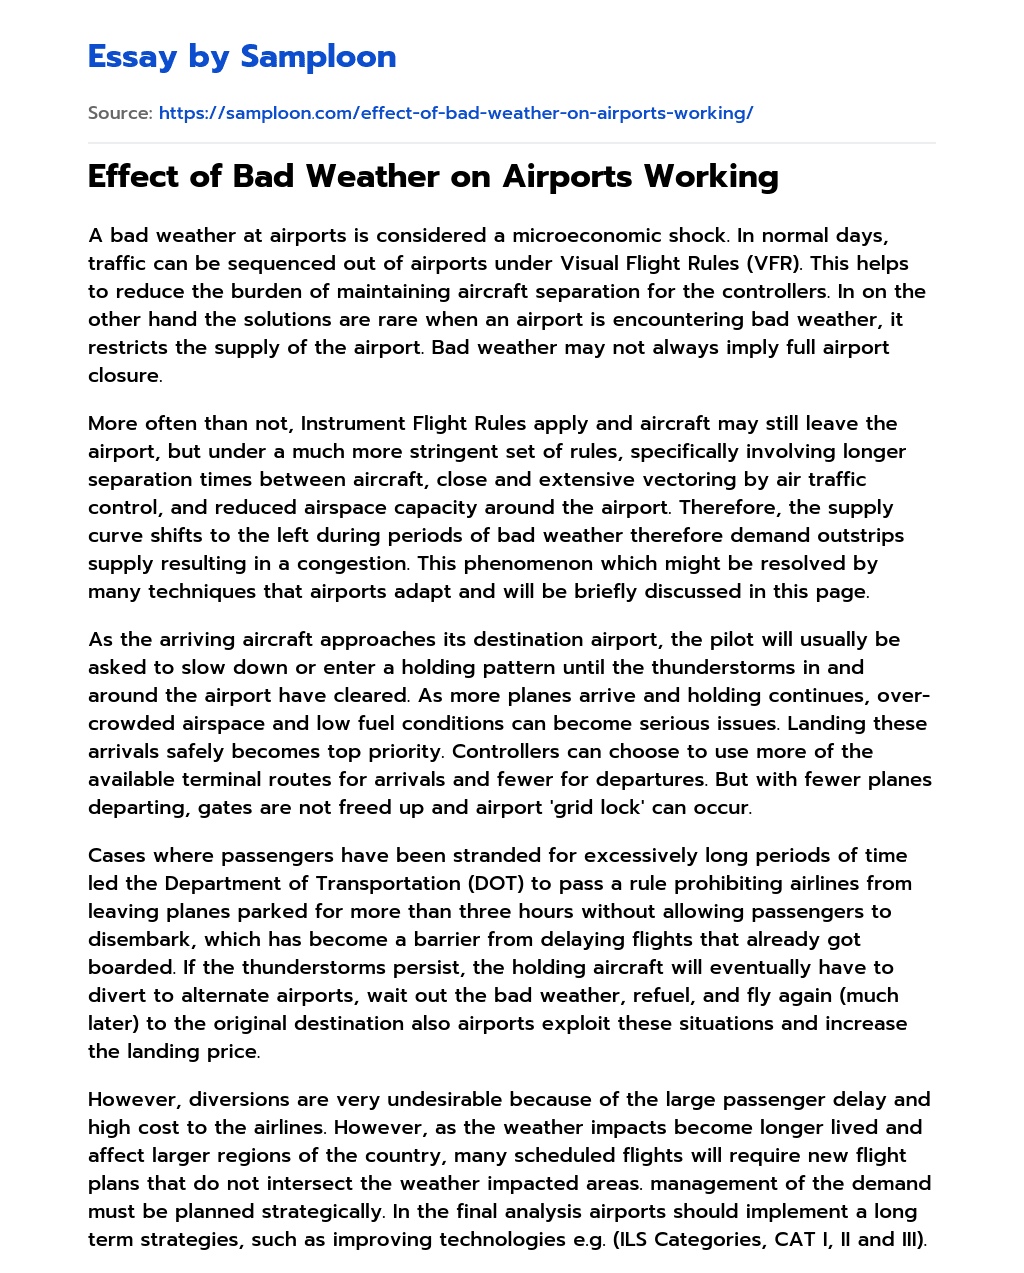 Effect of Bad Weather on Airports Working essay